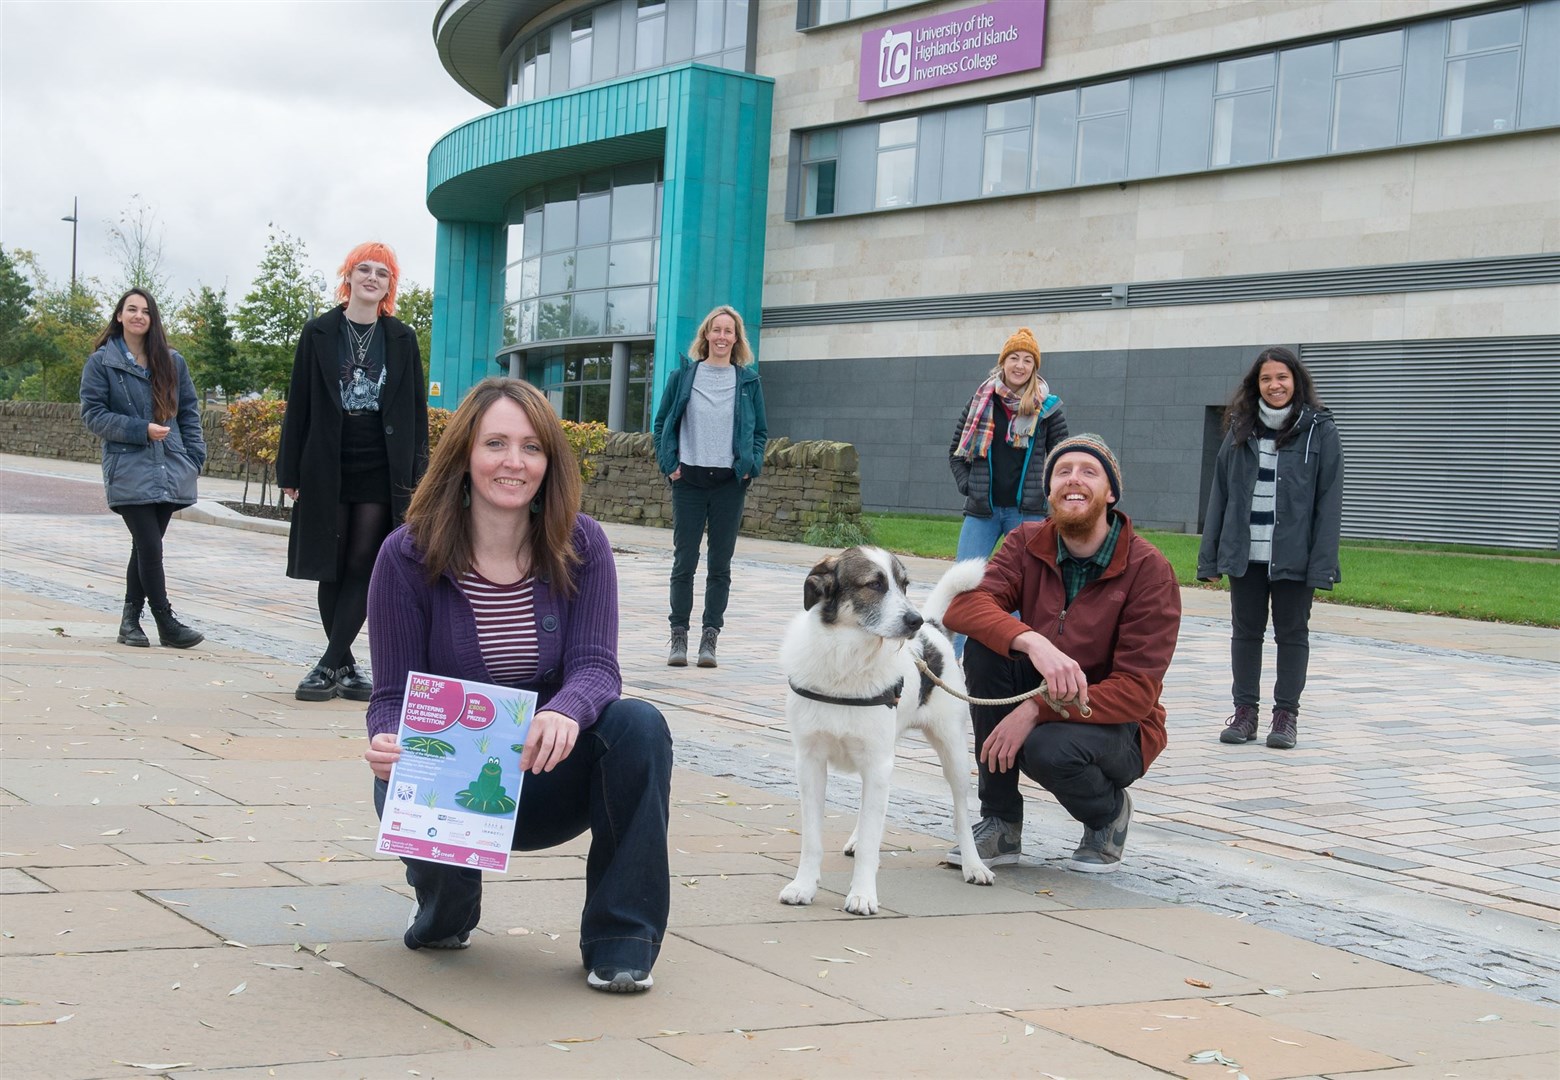 Postgraduate research students Celia Delugin, Lydia McGill, Alison Martin, Joanna Rodgers, Sunny Bradbury with Odin the dog, and Shraveena Venkatesh join last year's student winner Roma Gibb (front) to launch this year's competition.